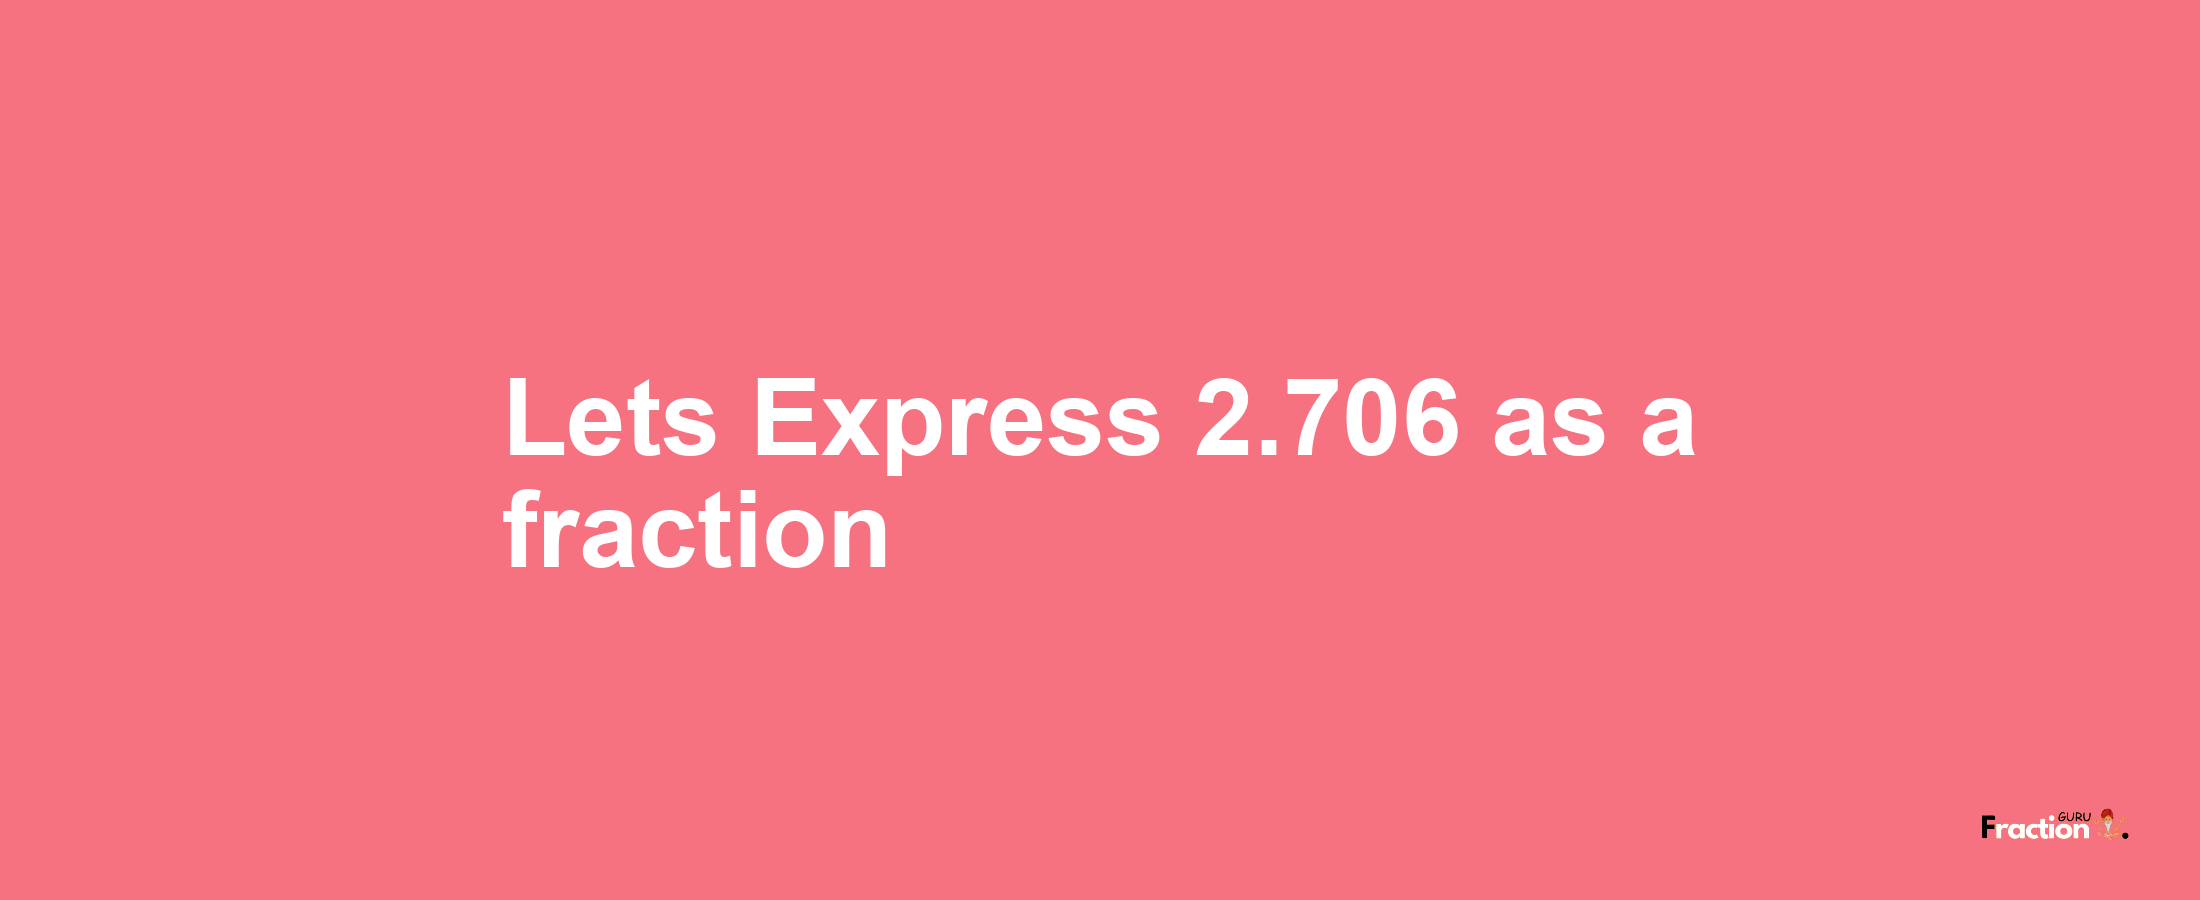 Lets Express 2.706 as afraction